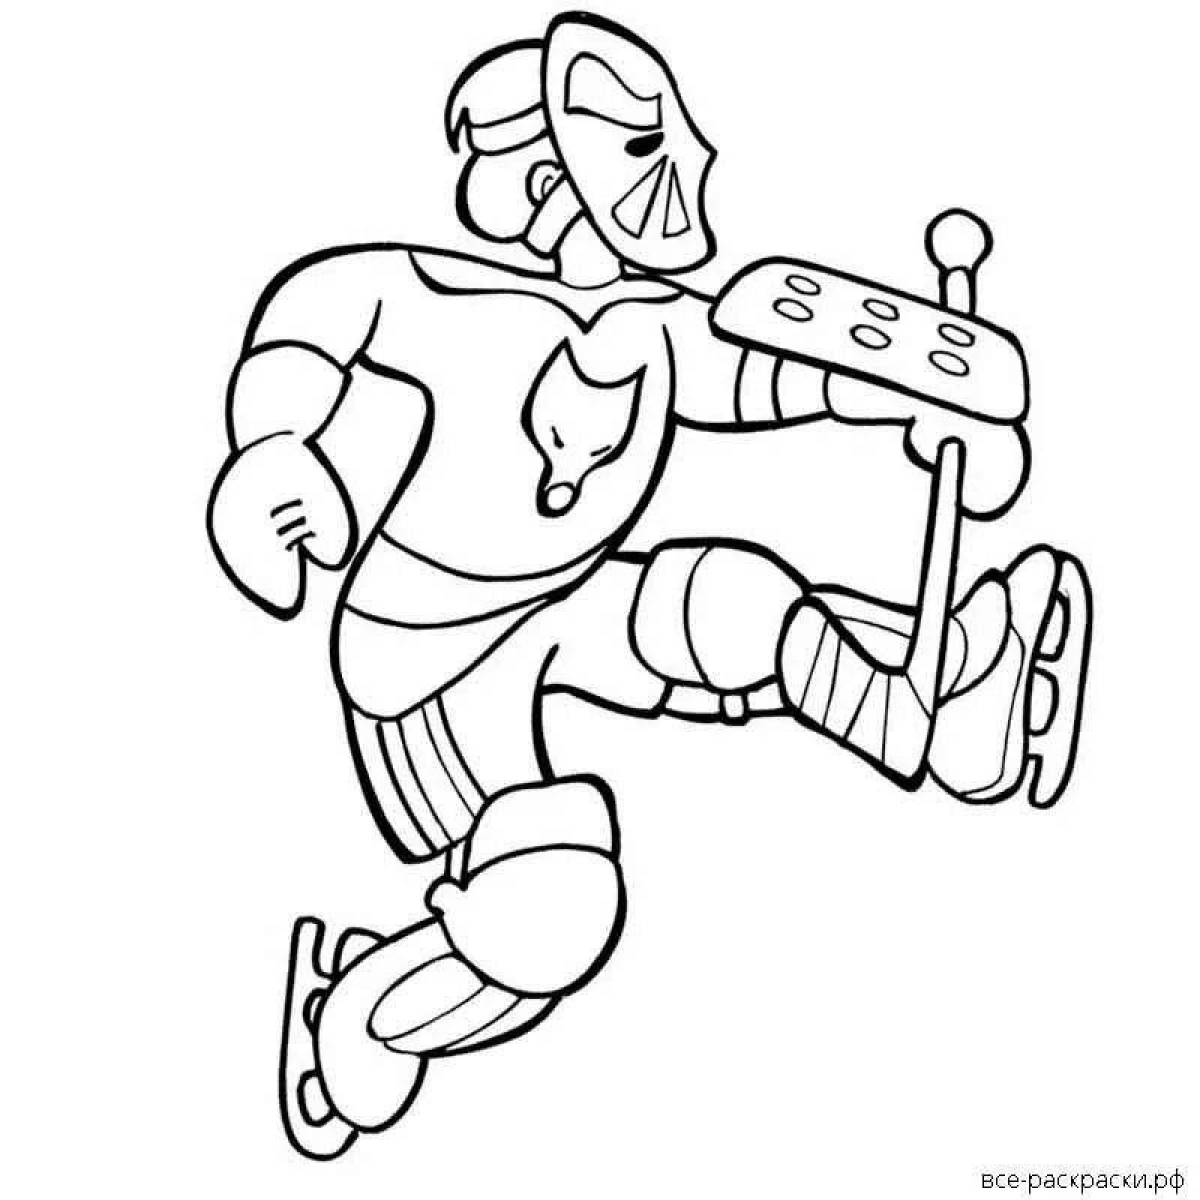 Dynamic hockey goaltender coloring page